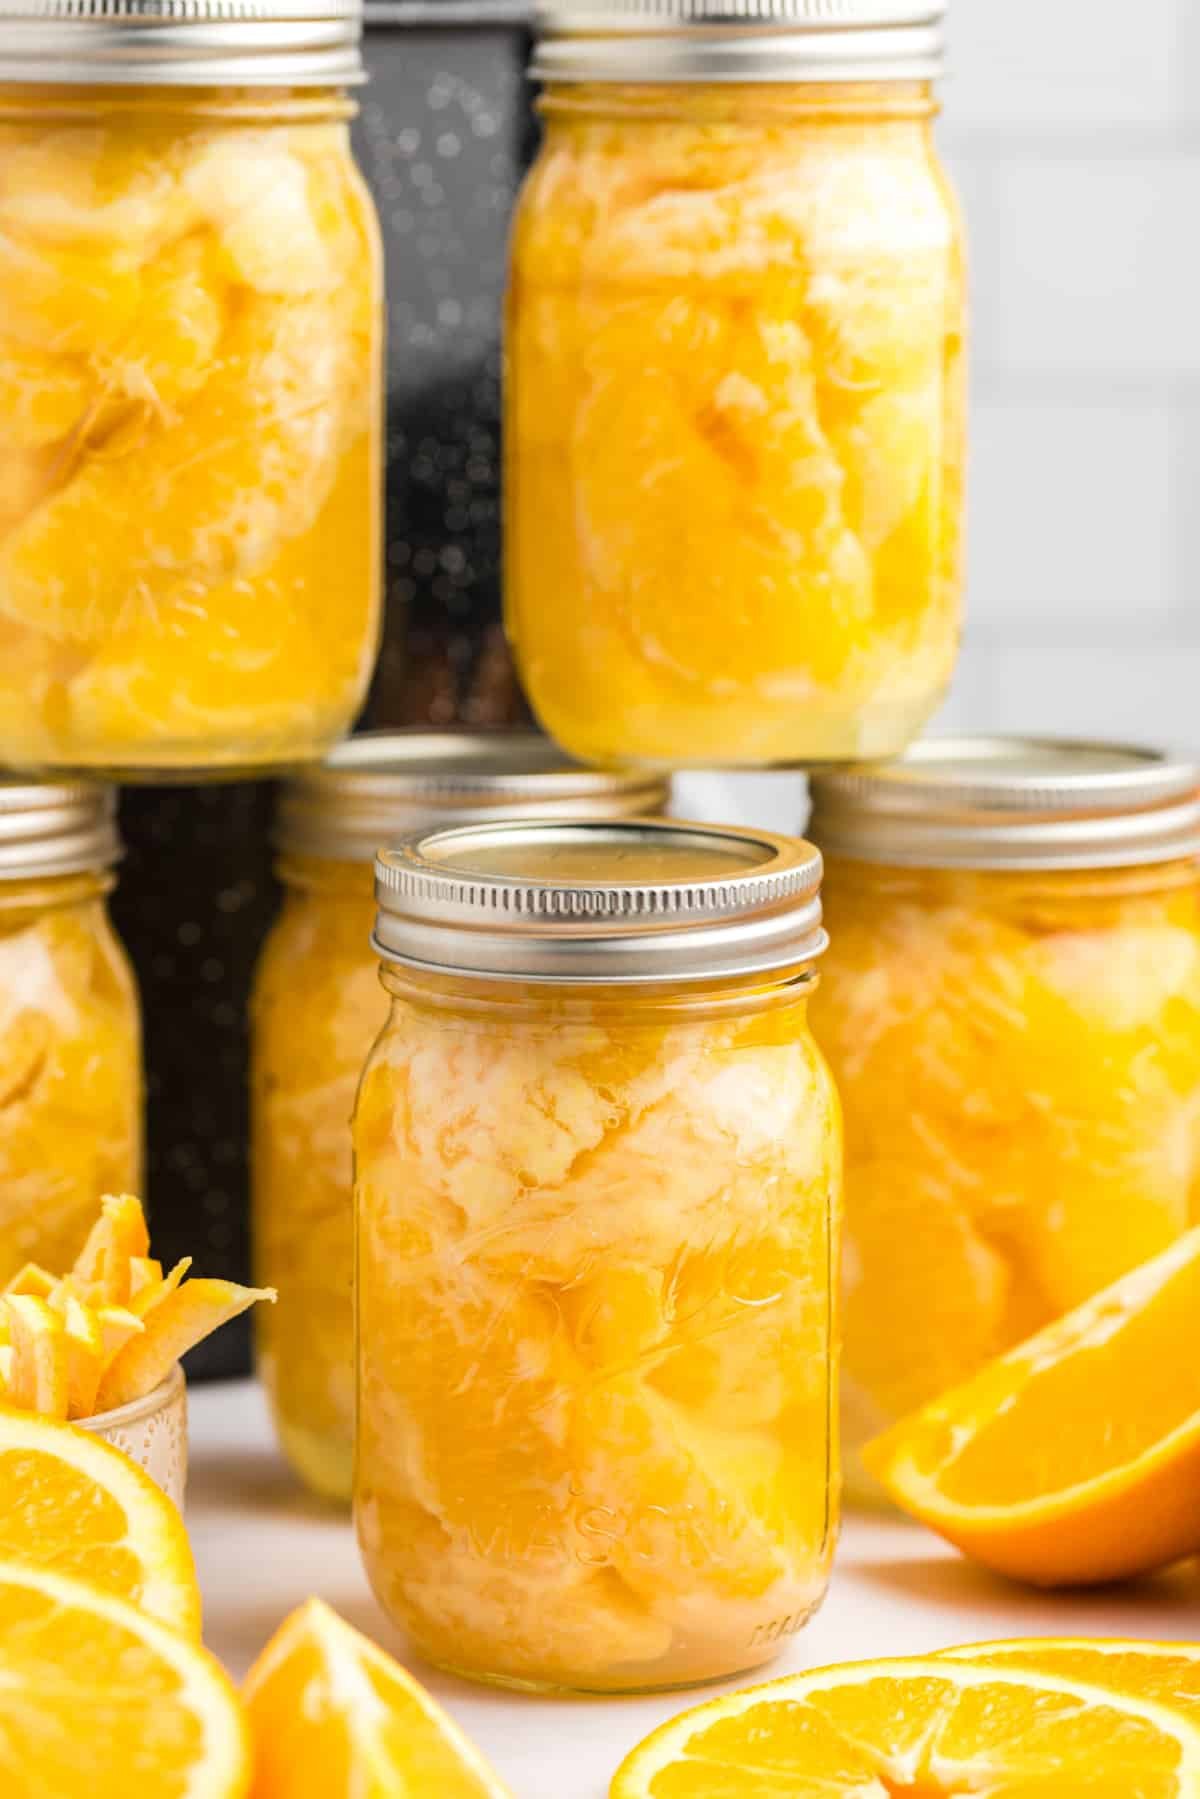 A stack of canning jars filled with orange segments.